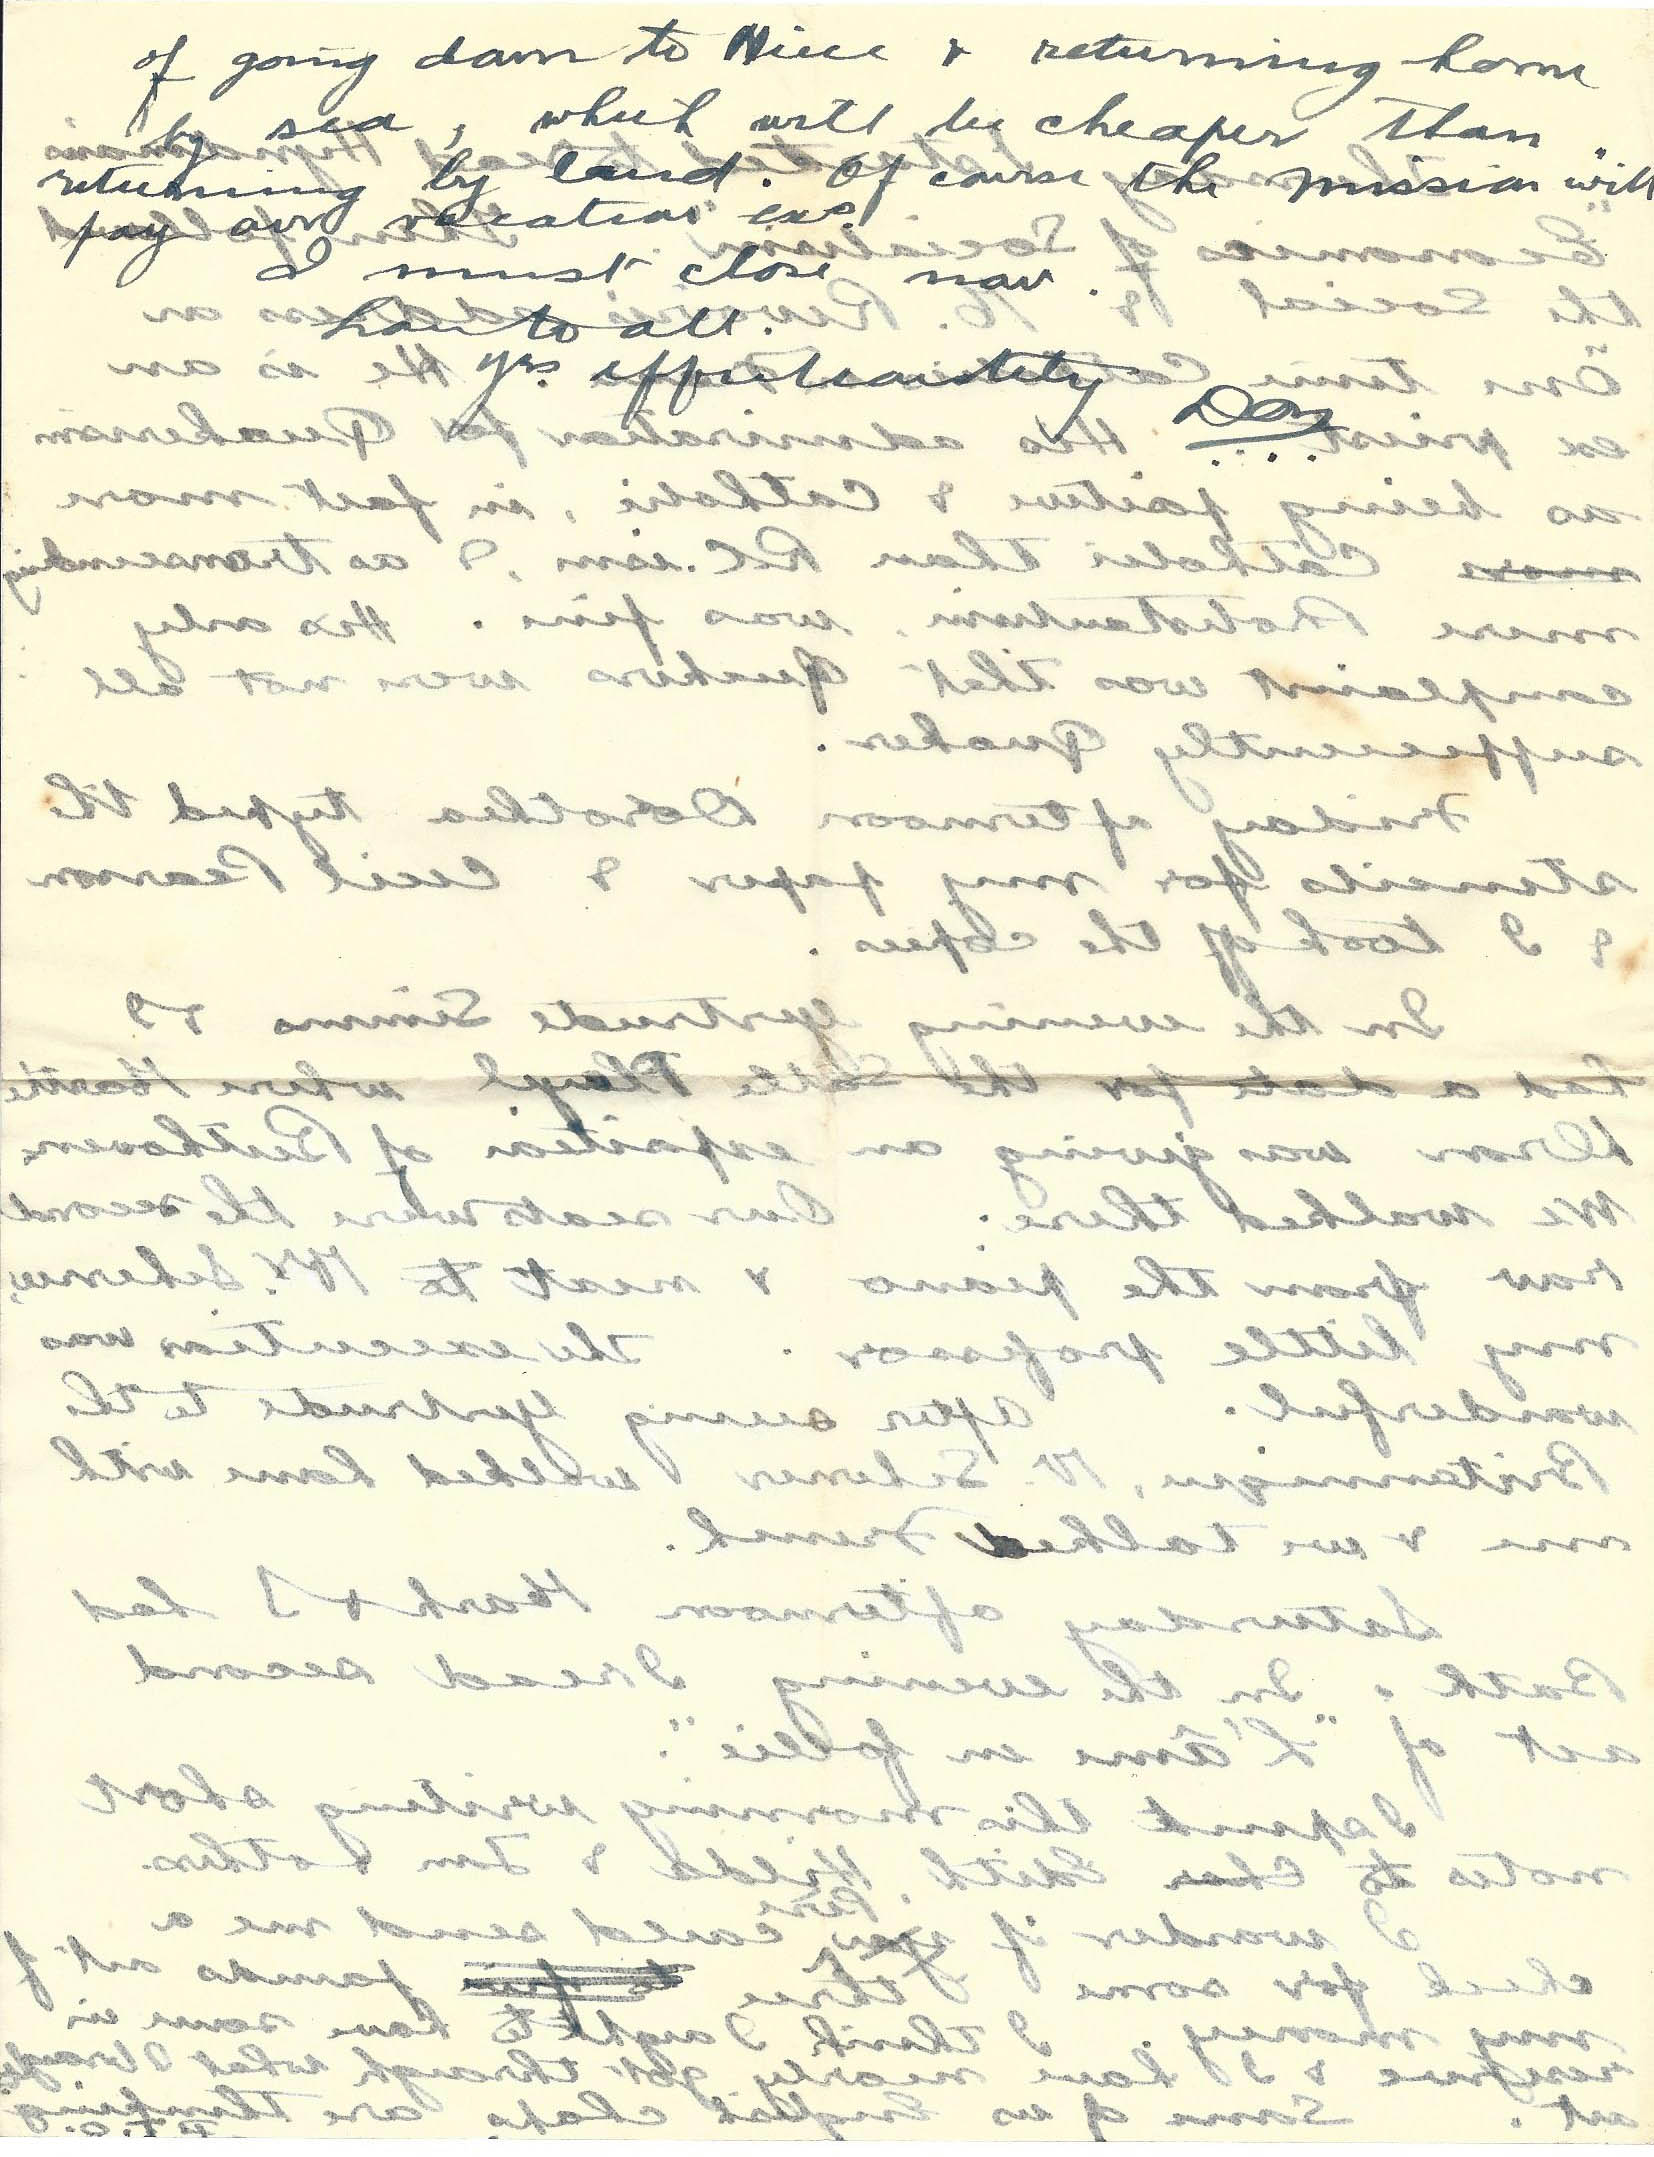 1920-02-22 p3 Donald Bearman letter to his father